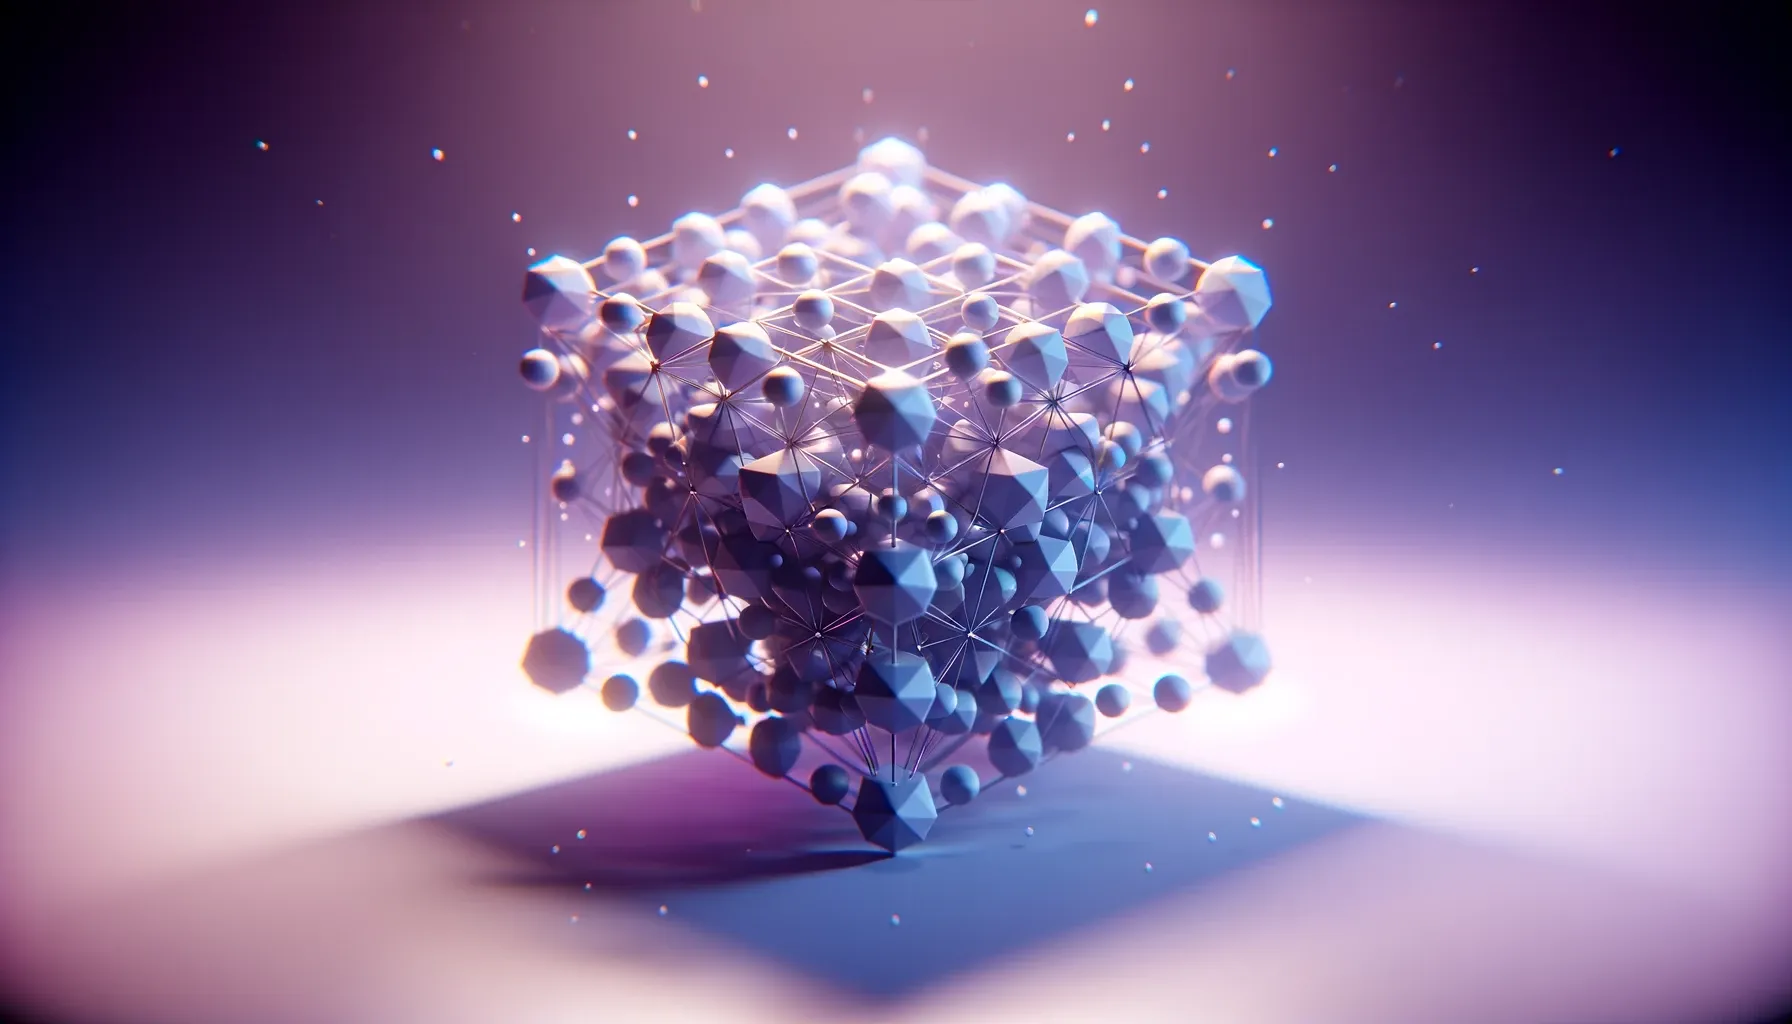 a collection of icospheres within a tesseract, depicting multi-dimensional vector space.